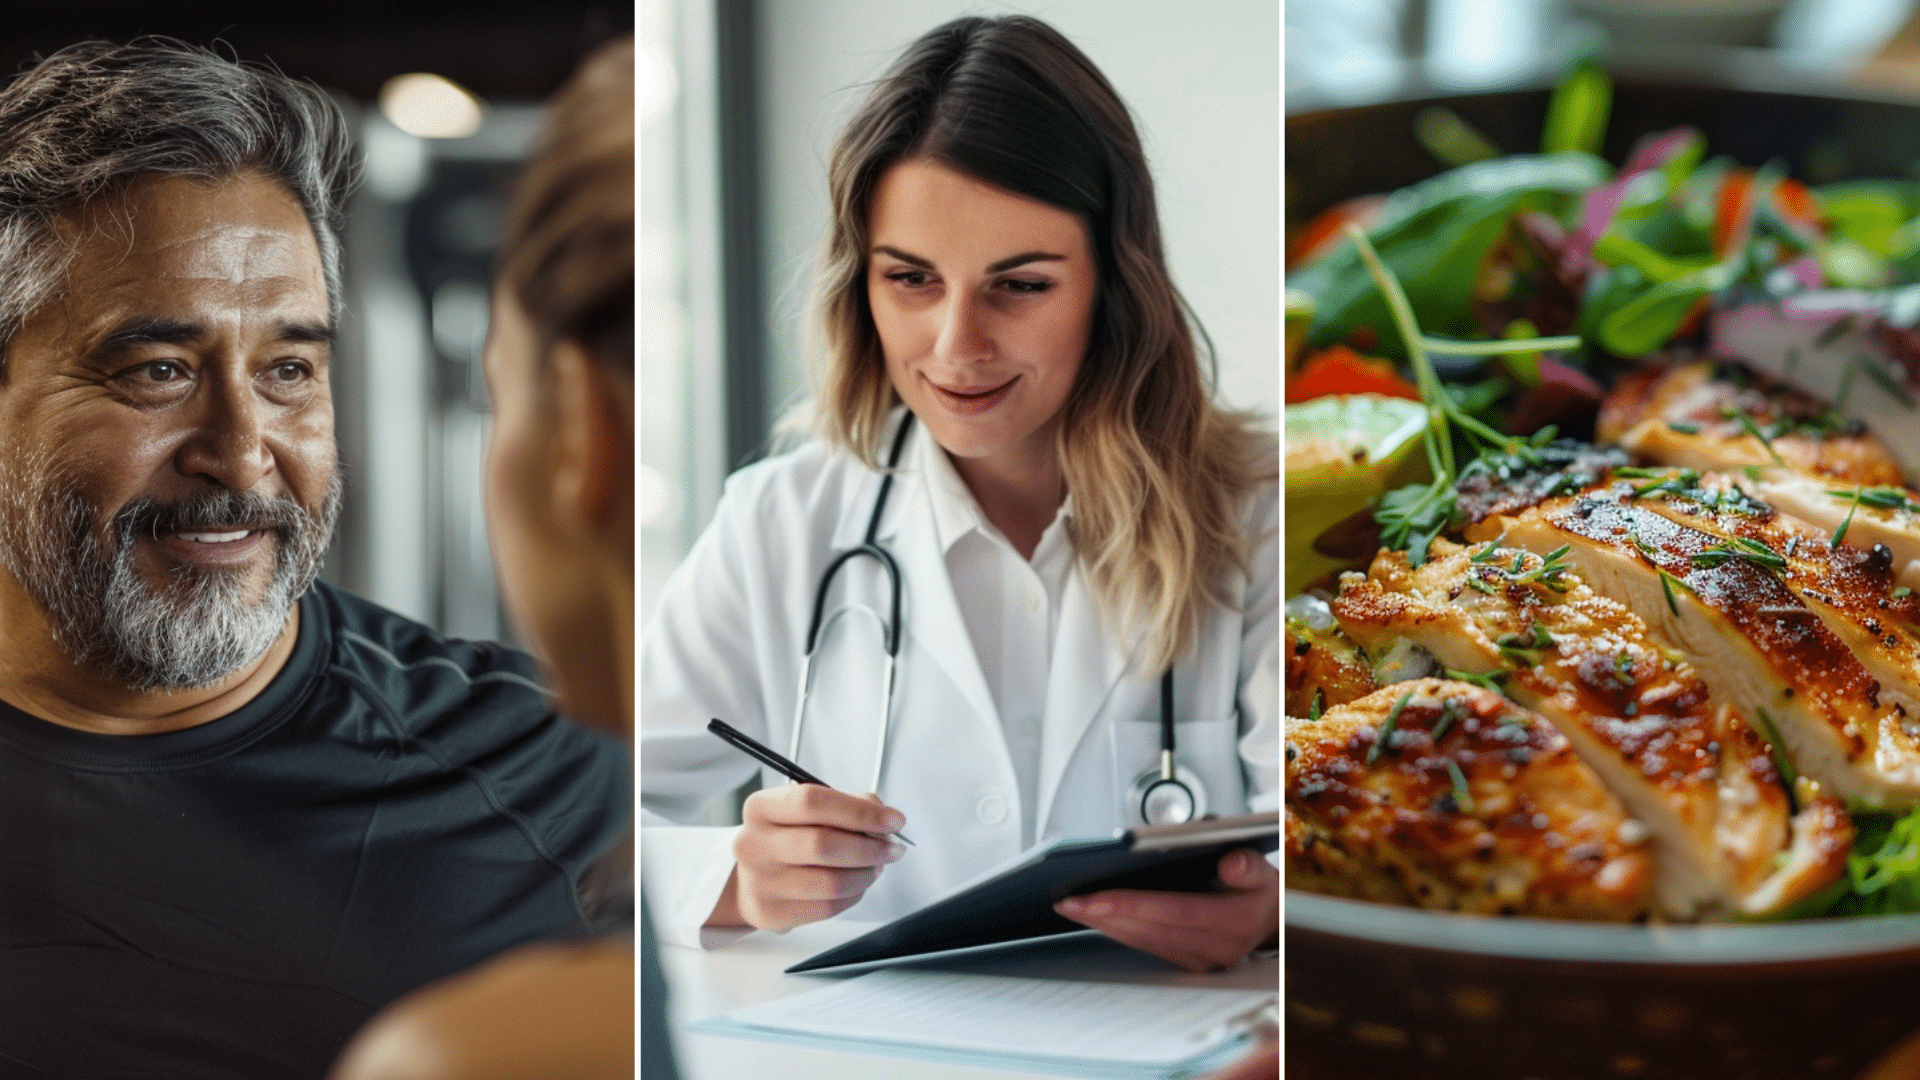 create an image of a food plate with keto diet signifying a healthy relationship with food Premium stock image, create an image of a doctor wearing a white coat and holding a clipboard, seated at the table inside the clinic while talking to the patient Hispanic man inside the gym talking with a fitness trainer.